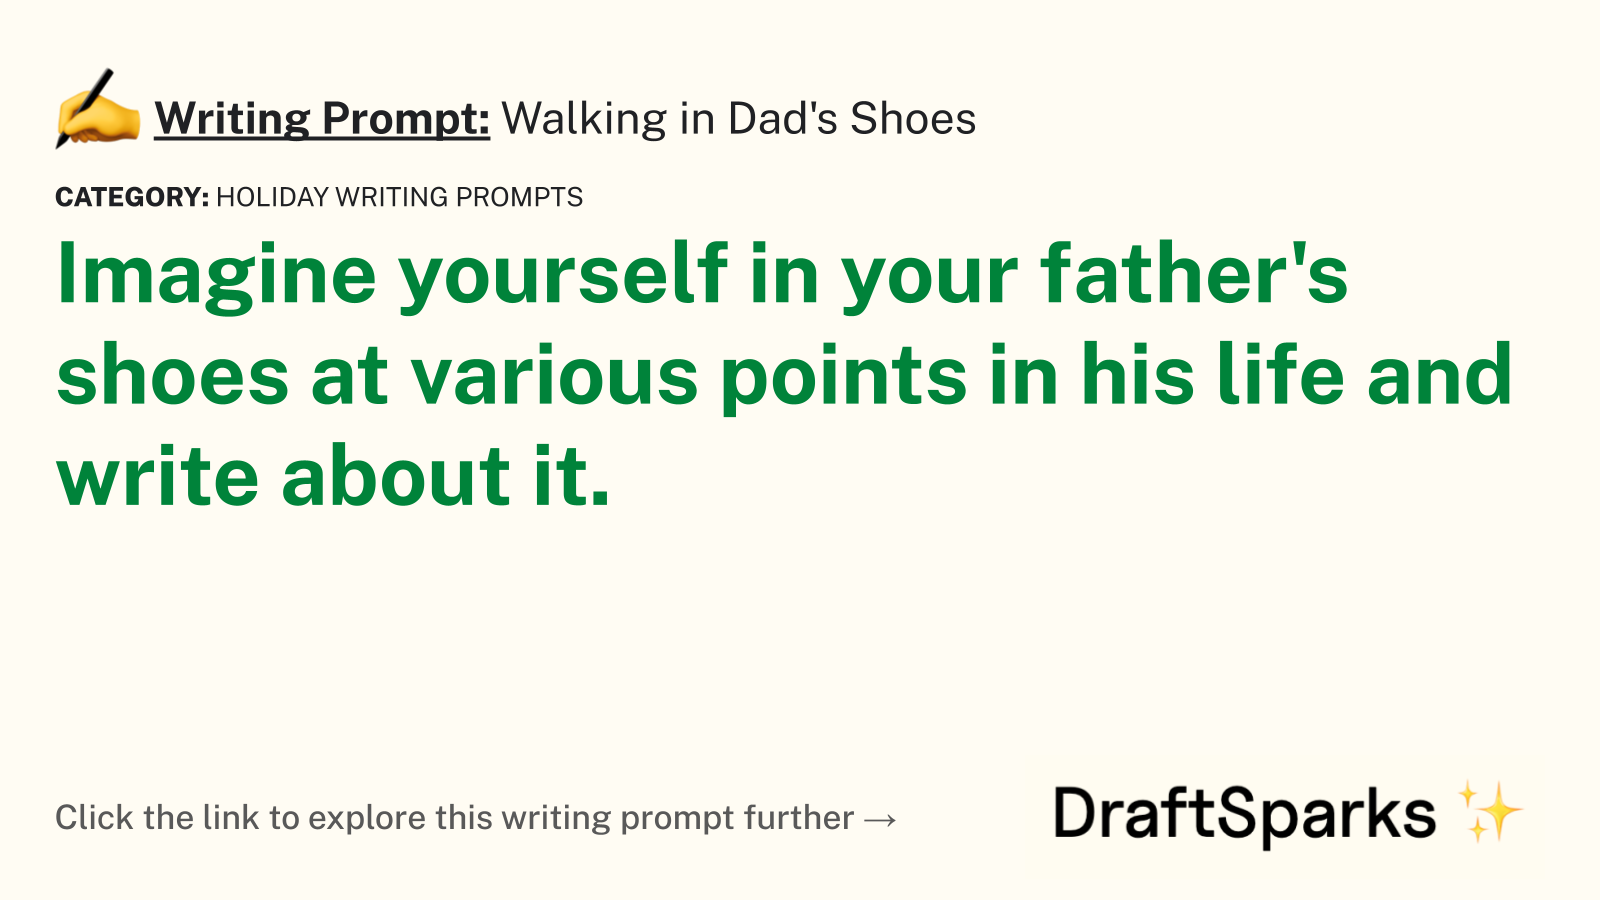 Walking in Dad’s Shoes